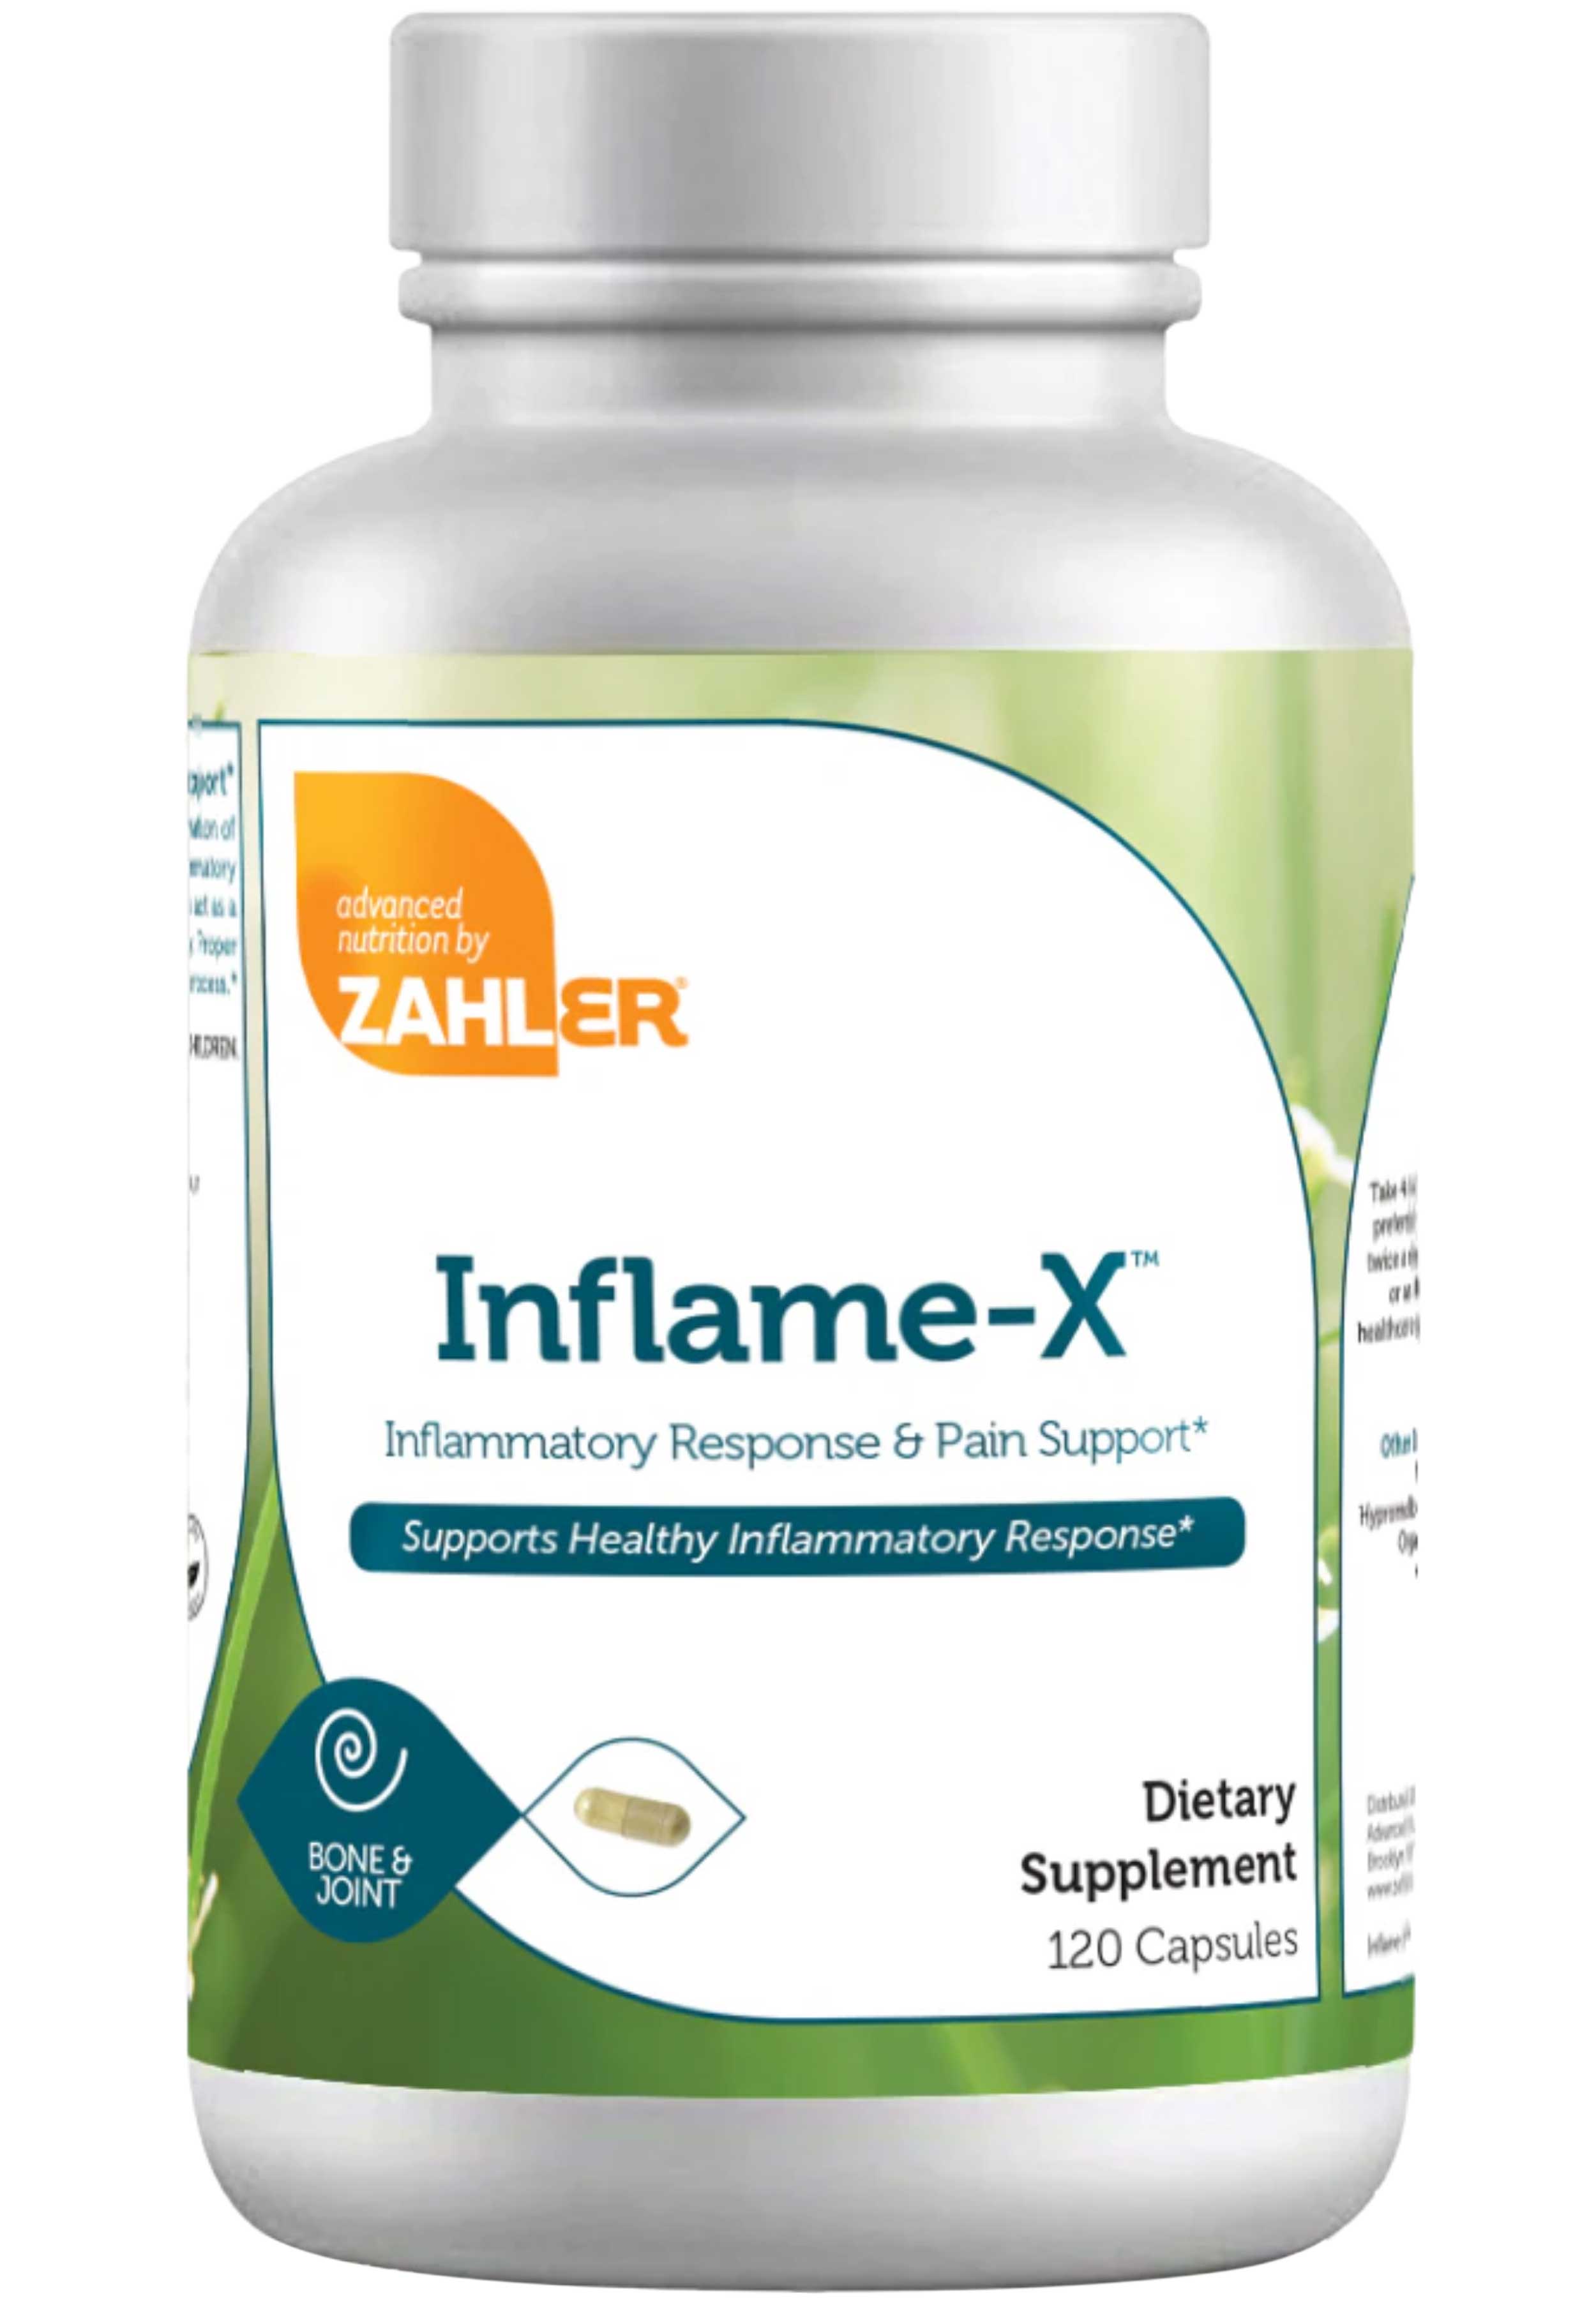 Advanced Nutrition By Zahler Inflame-X